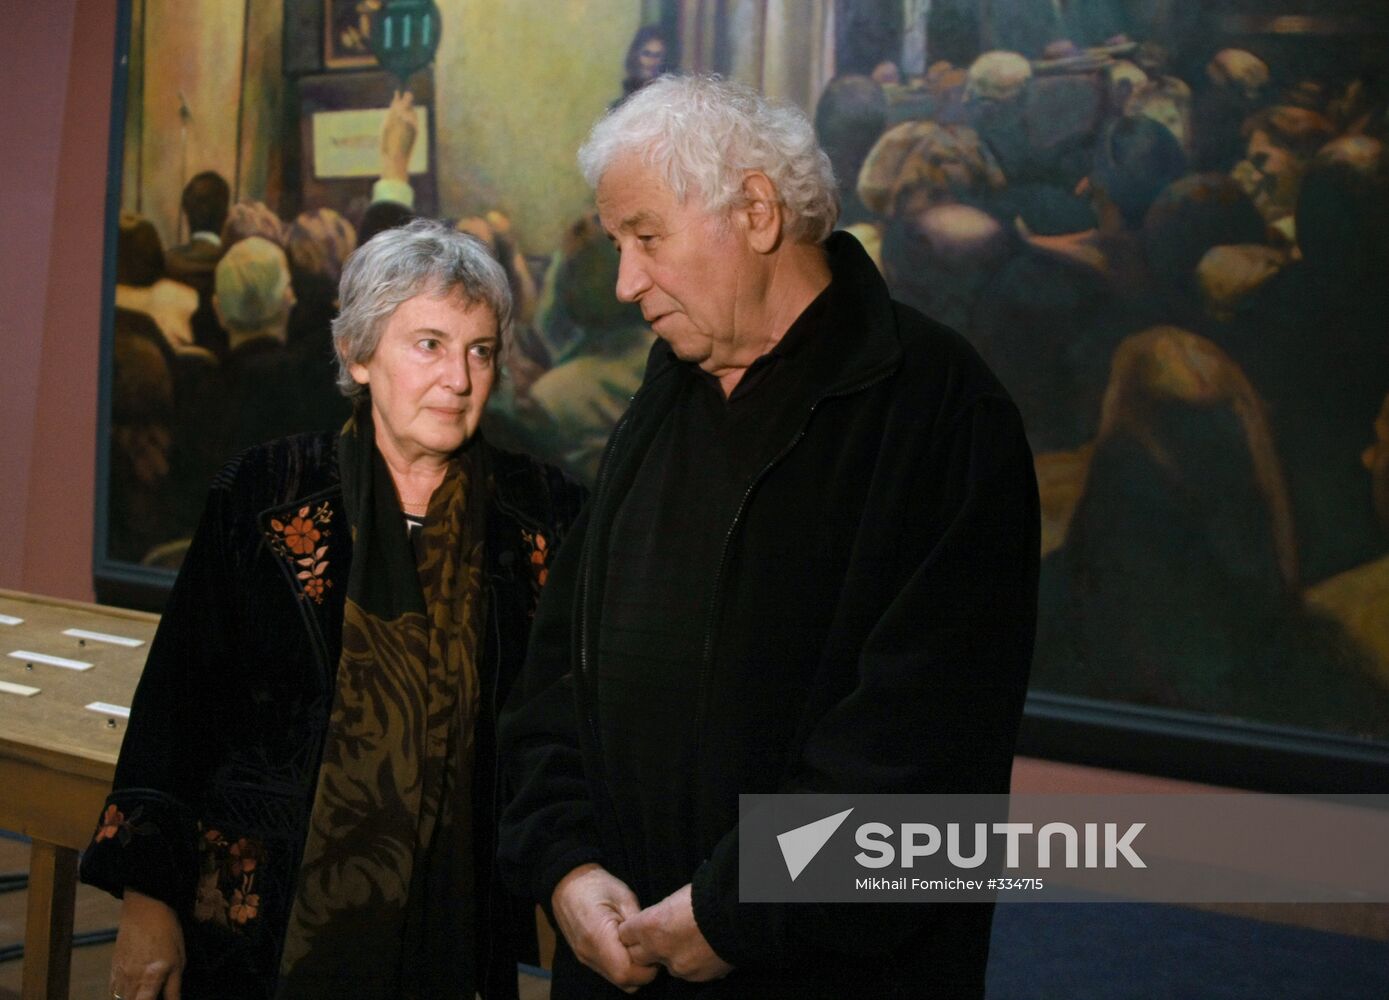 Ilya and Emilia Kabakov exhibition is to open in Moscow